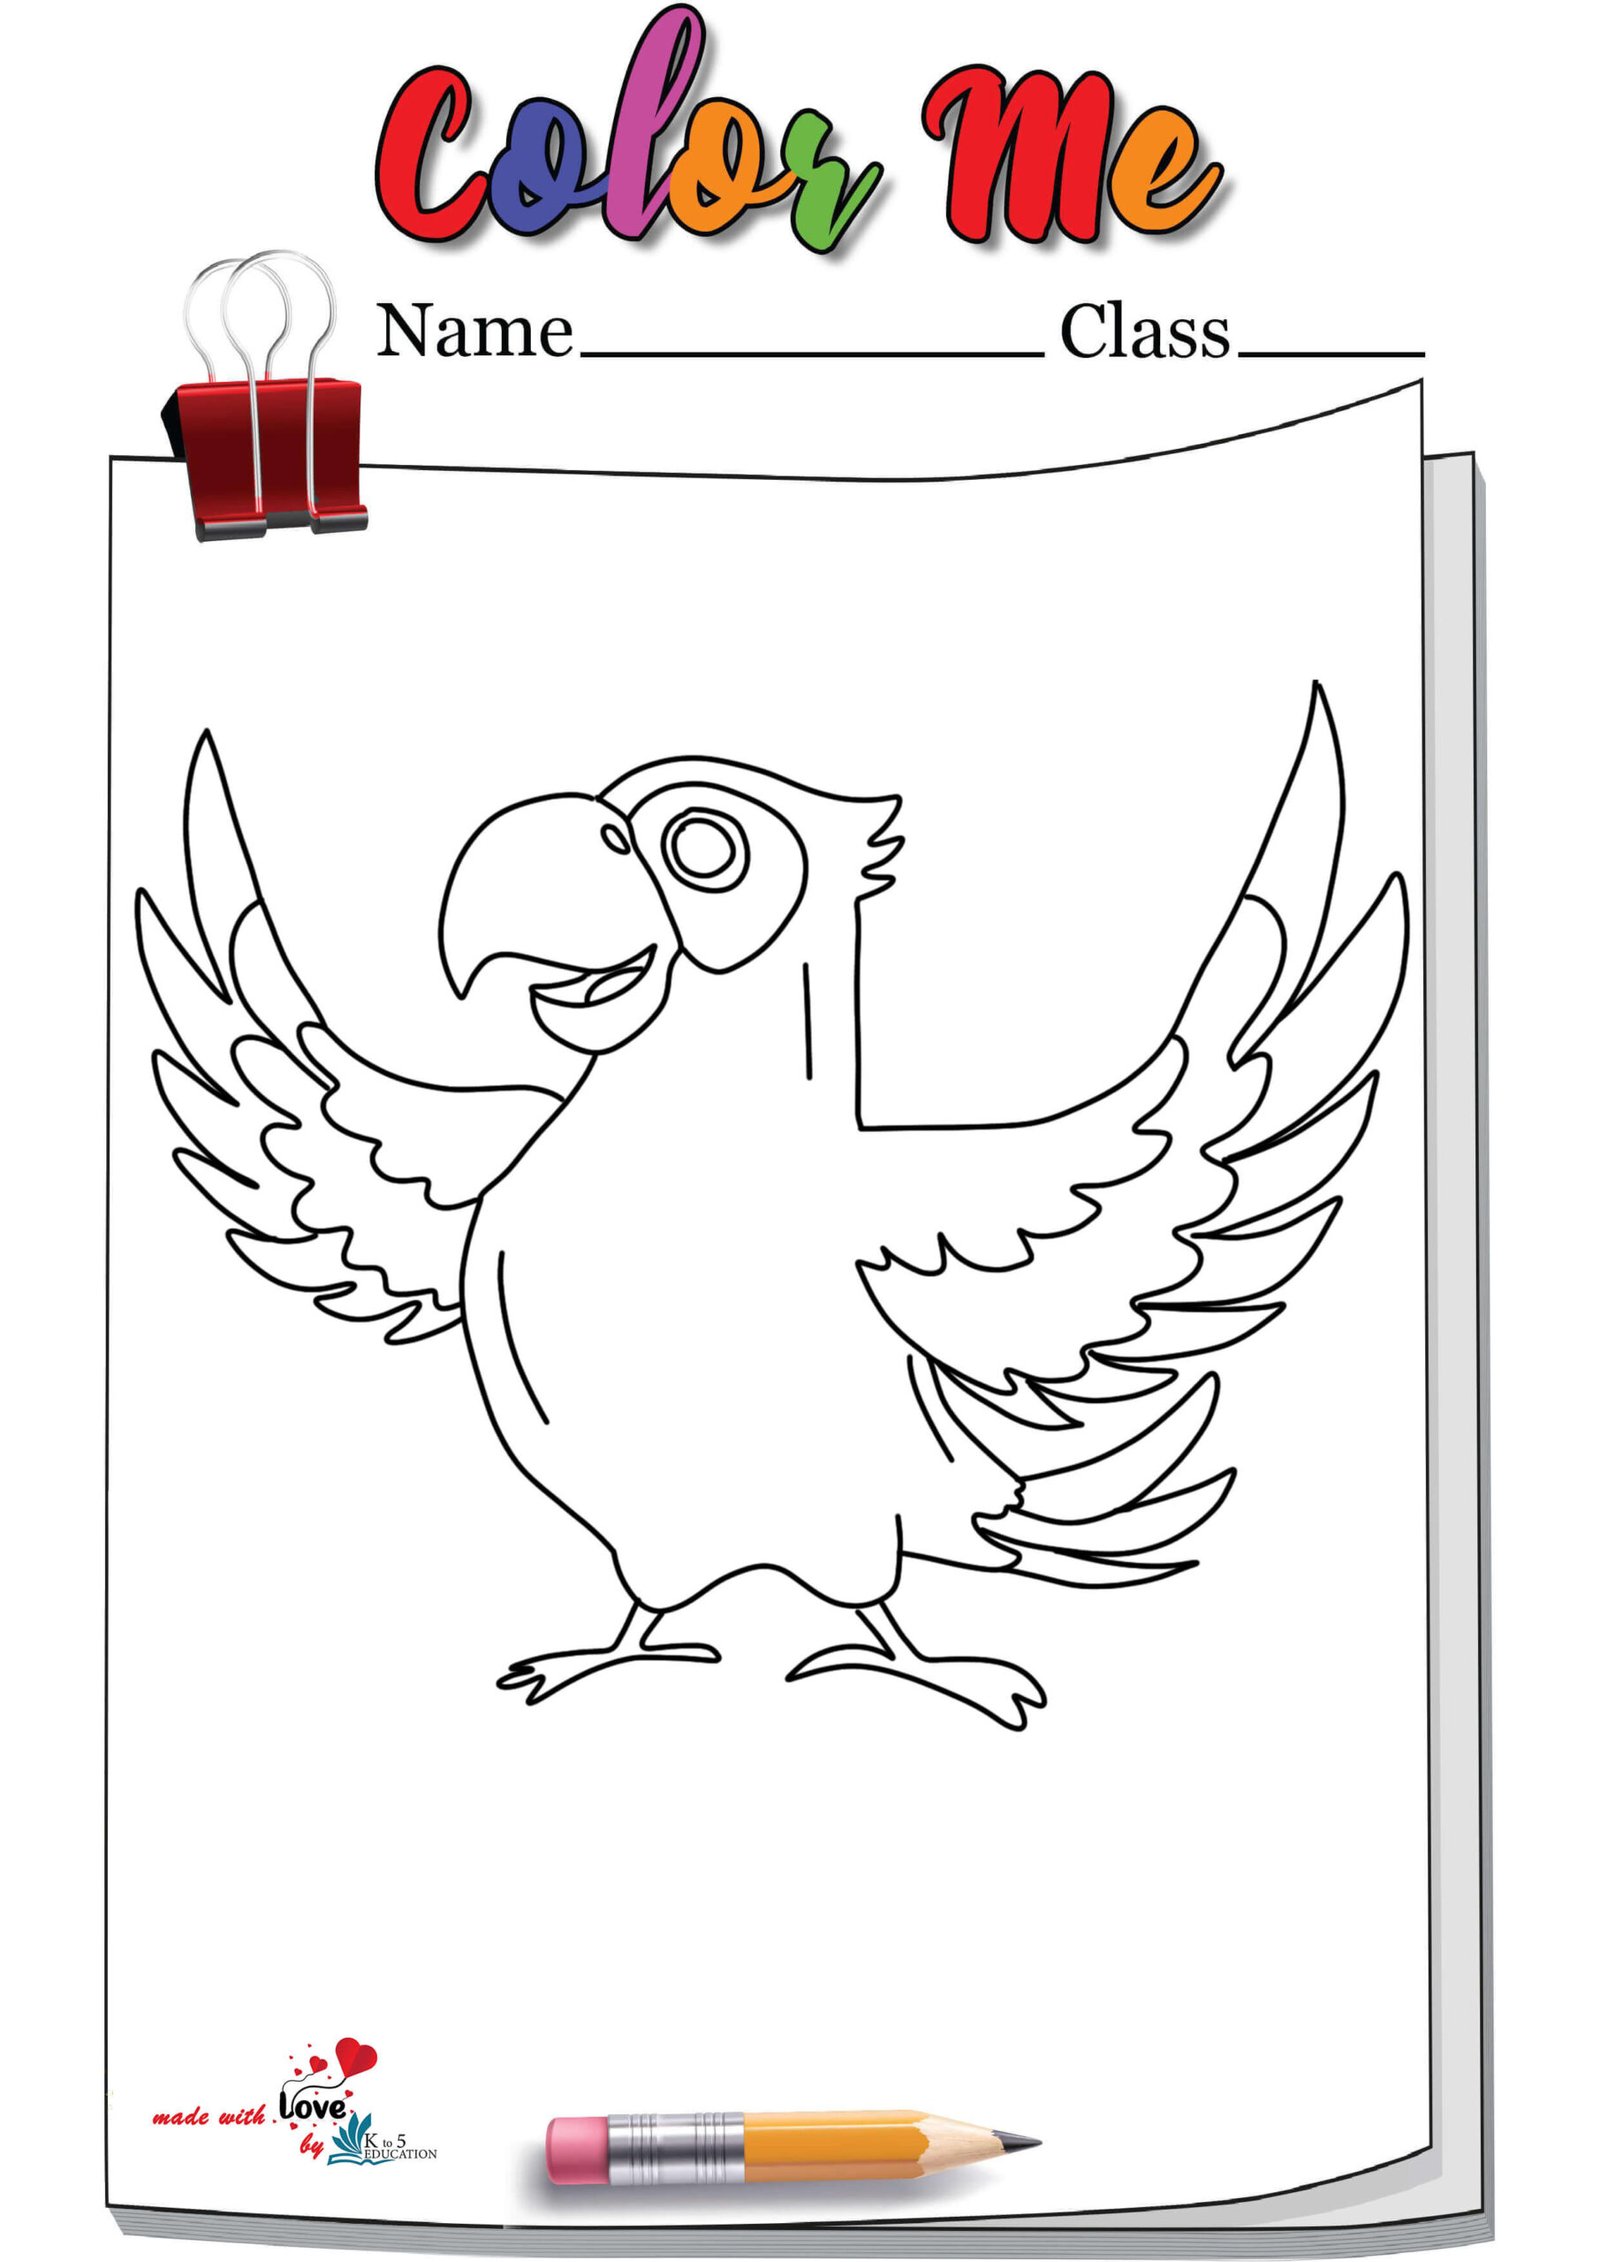 Standing Parrot Coloring Page